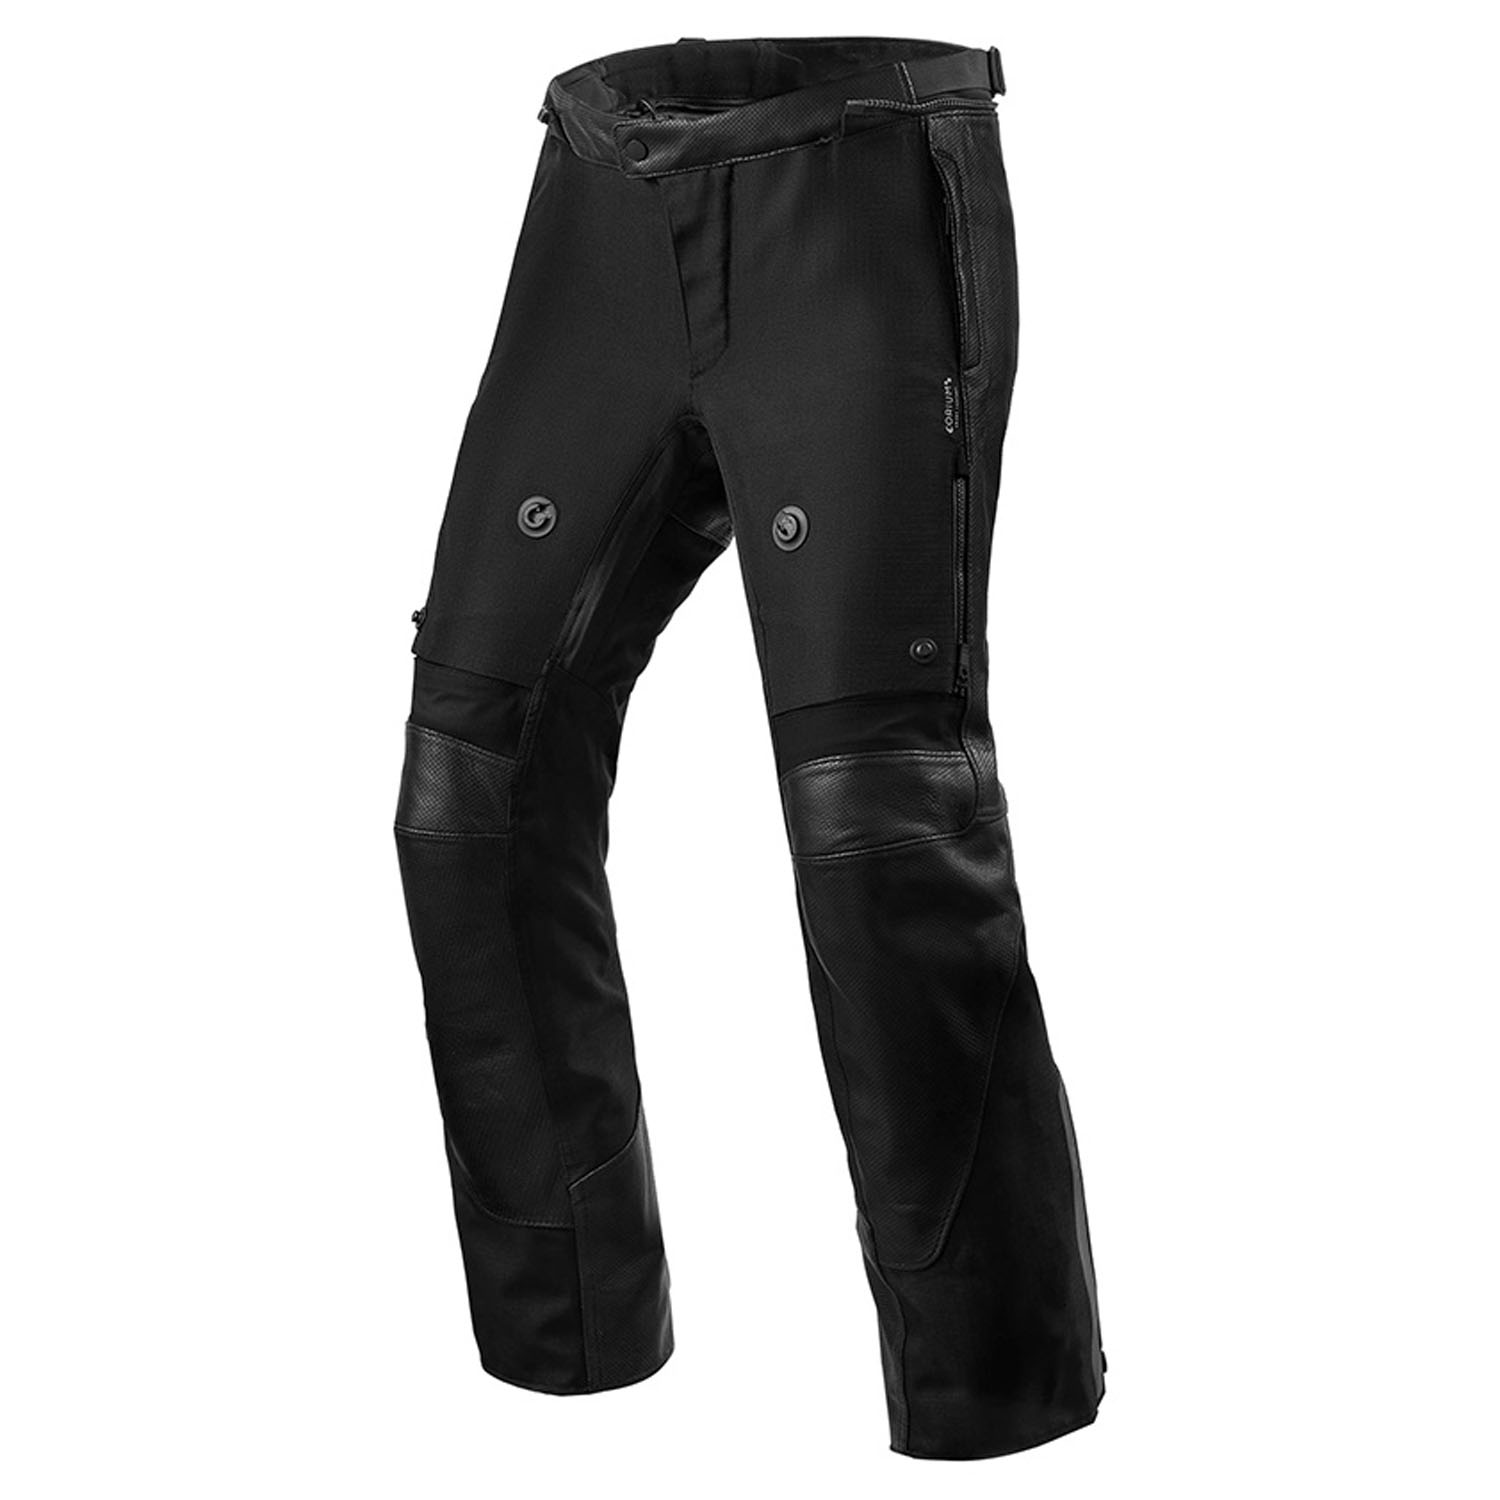 Image of REV'IT! Trousers Valve H2O Black Standard Motorcycle Pants Size 50 ID 8700001315807